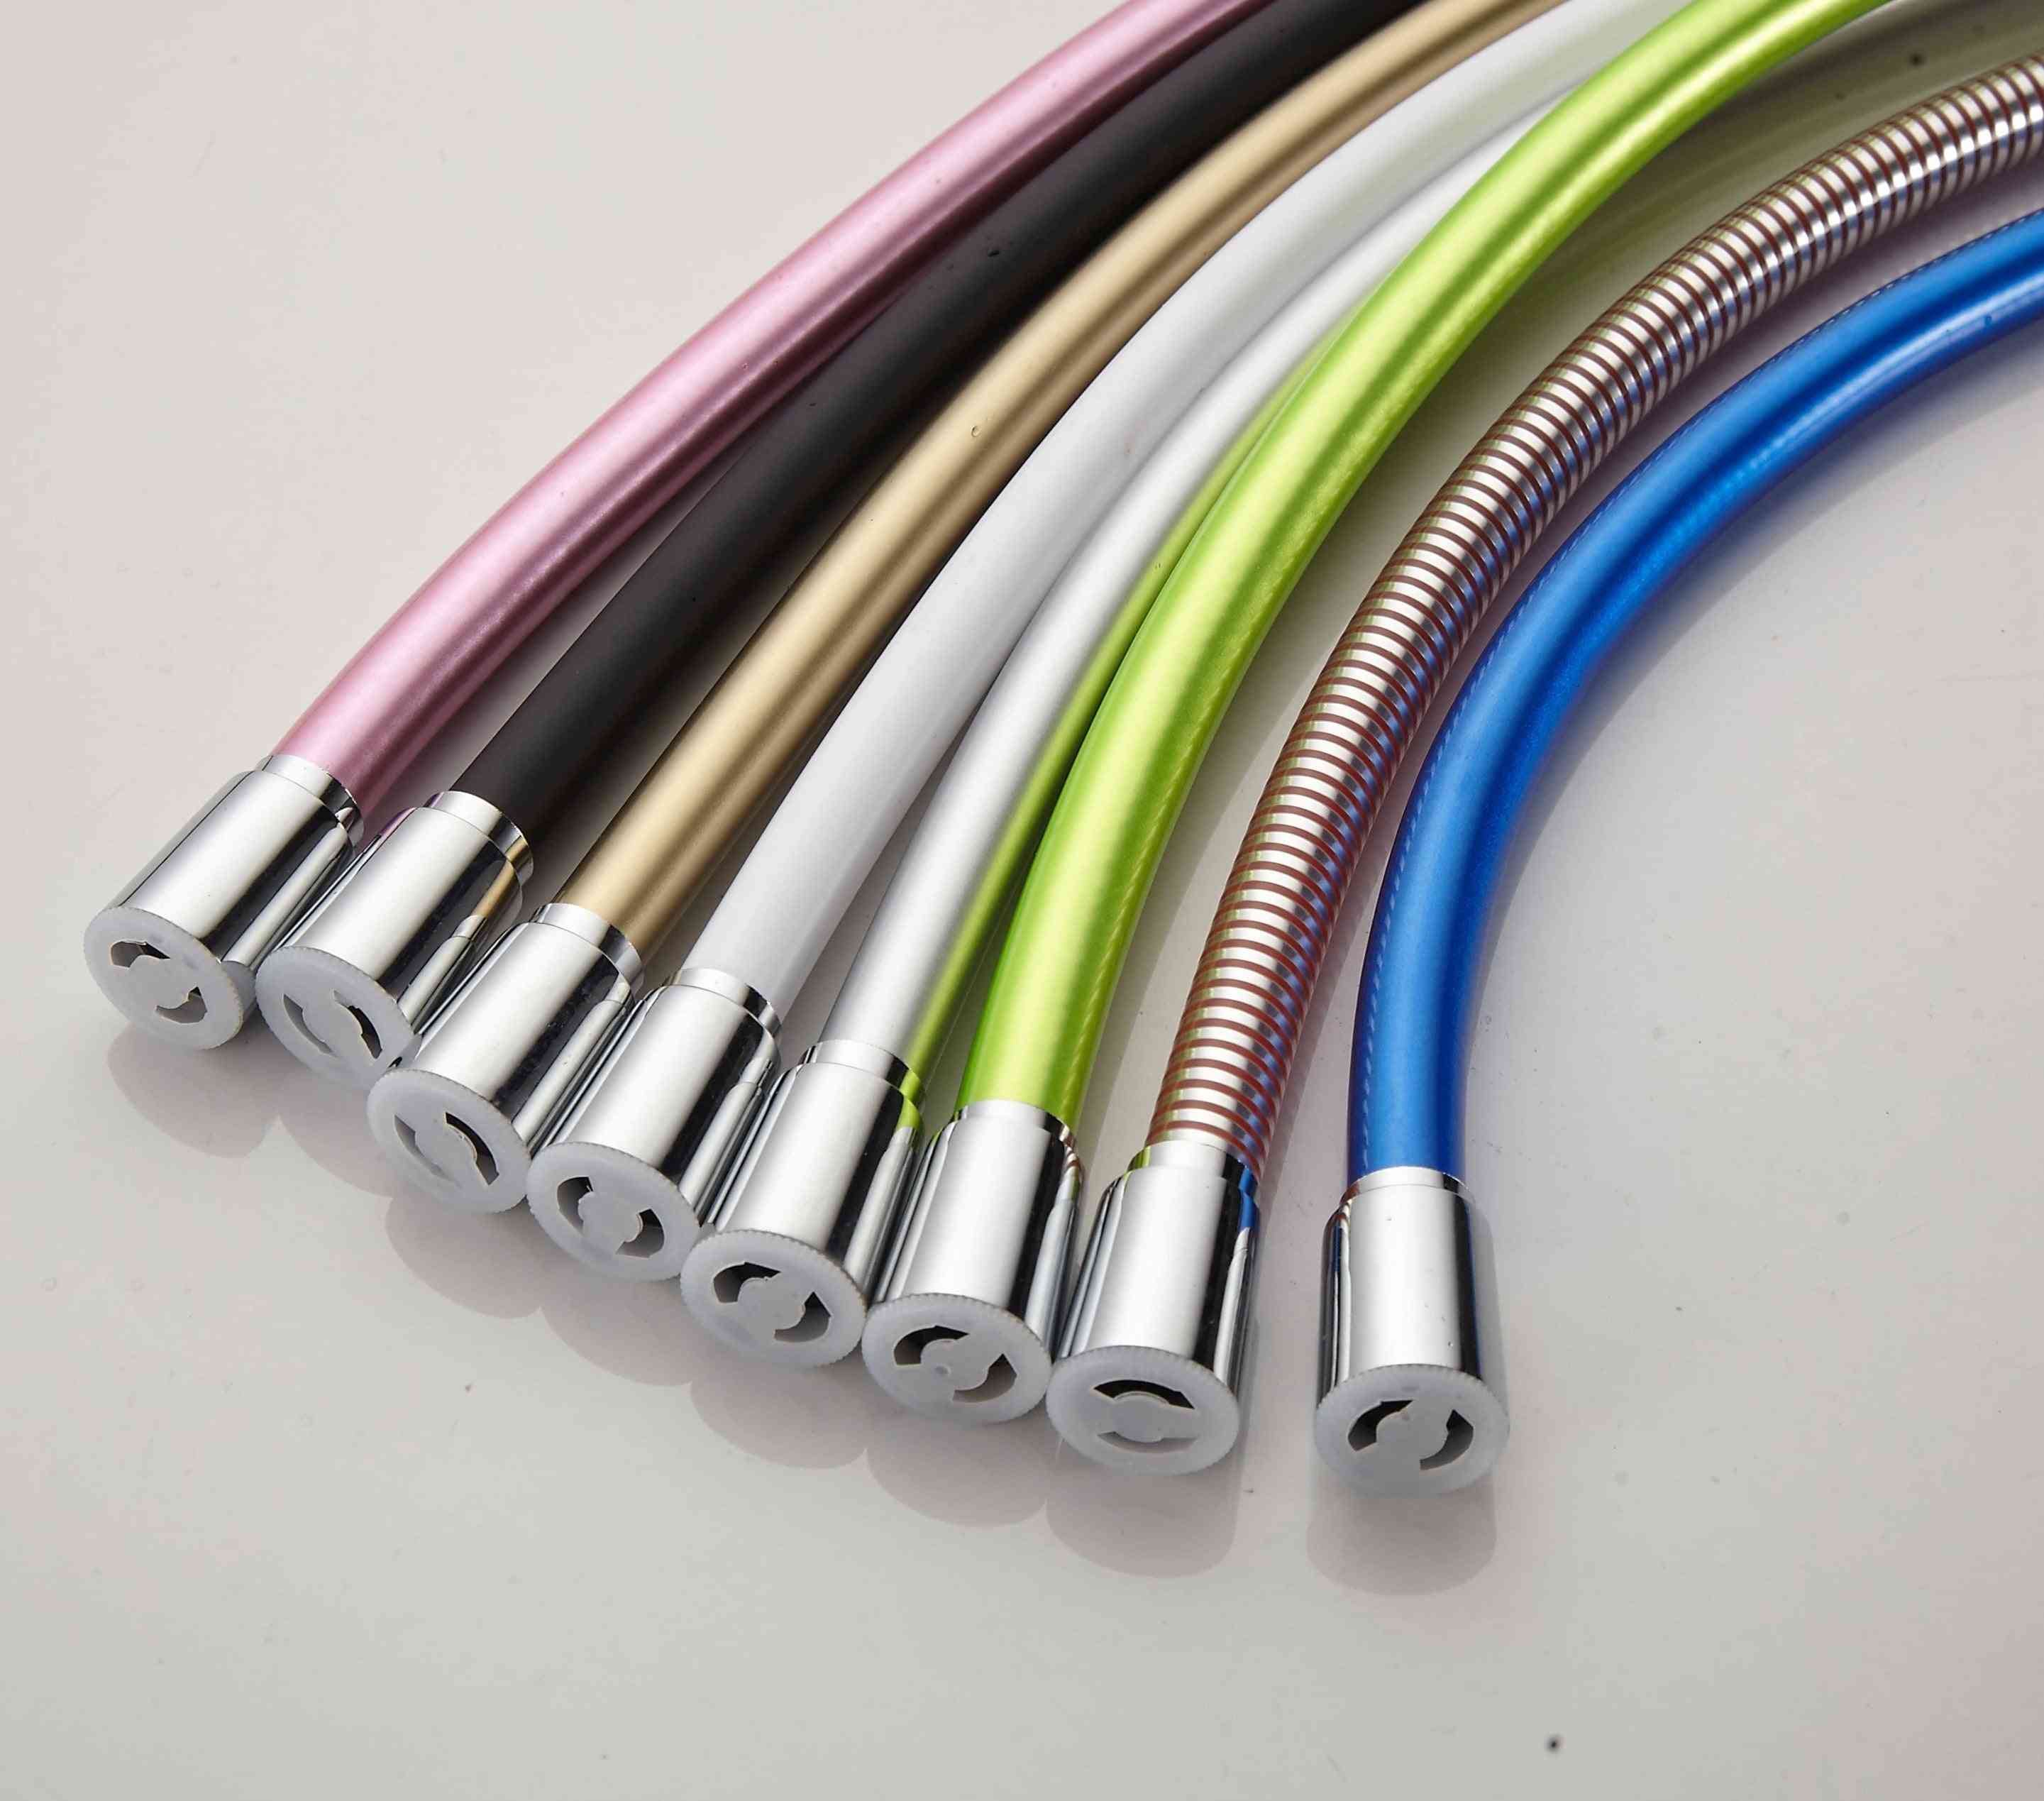 High Quality 1.5m Pvc Flexible Shower Hose Explosion-proof Pipes